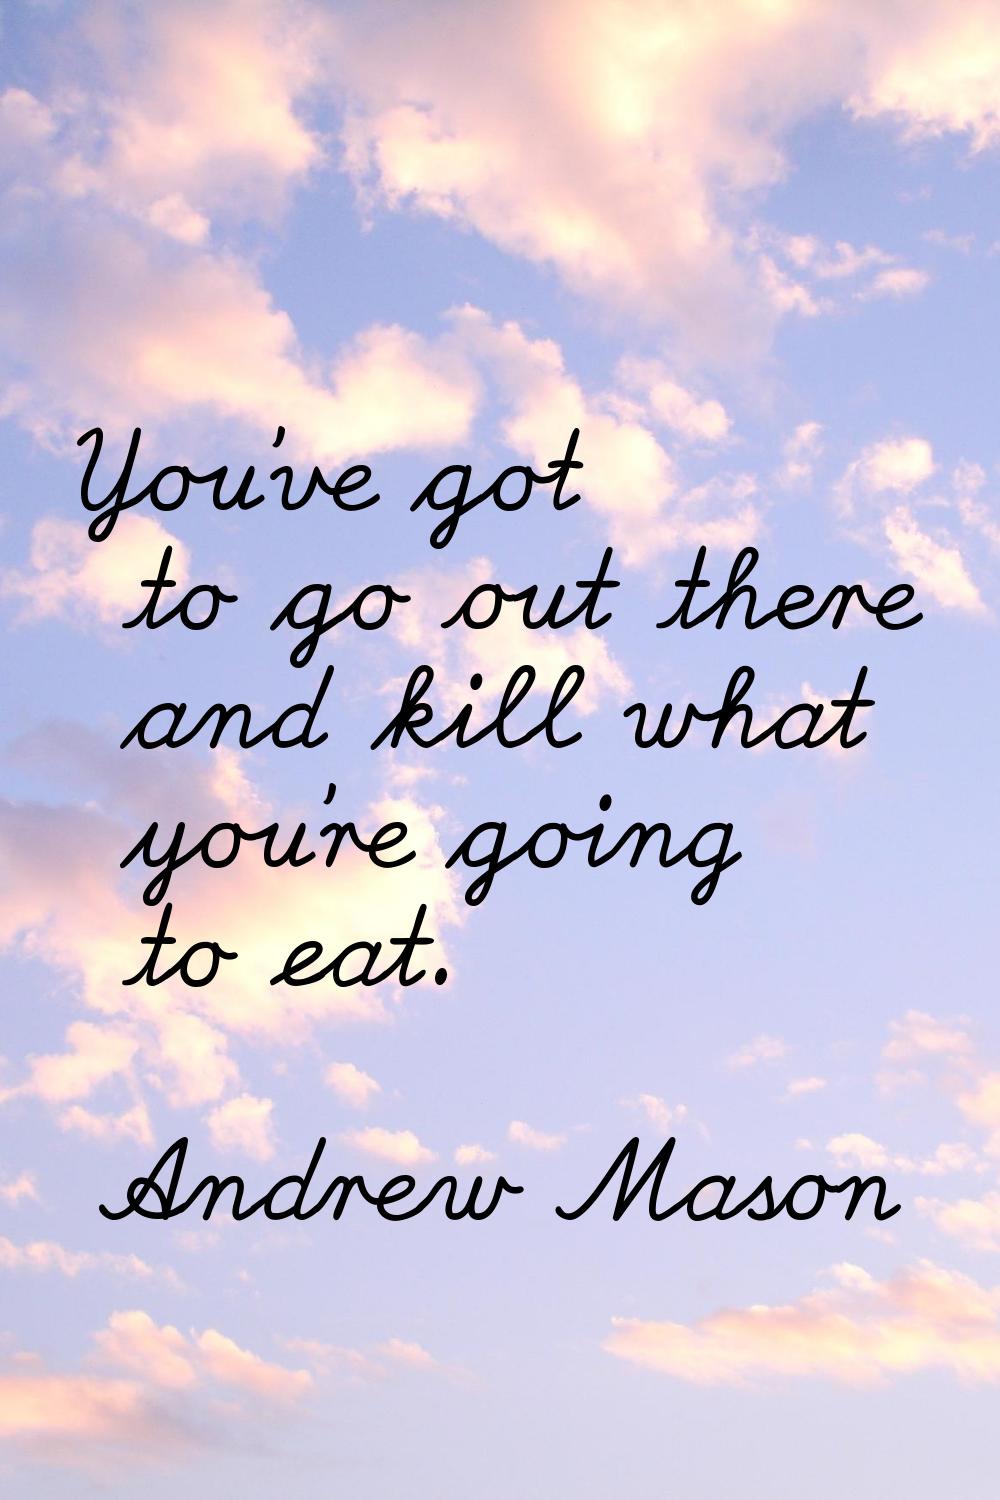 You've got to go out there and kill what you're going to eat.